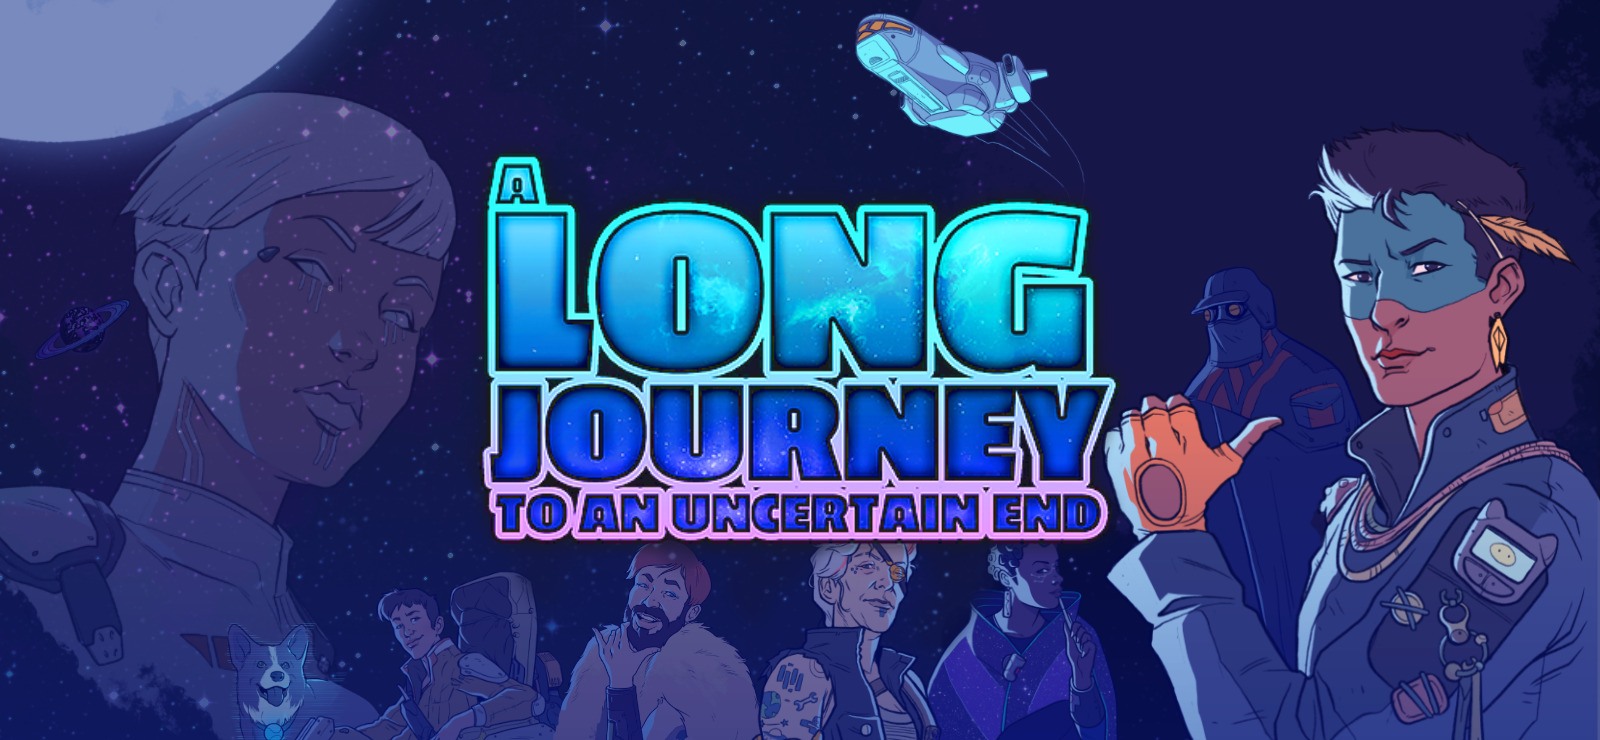 for mac download A Long Journey to an Uncertain End